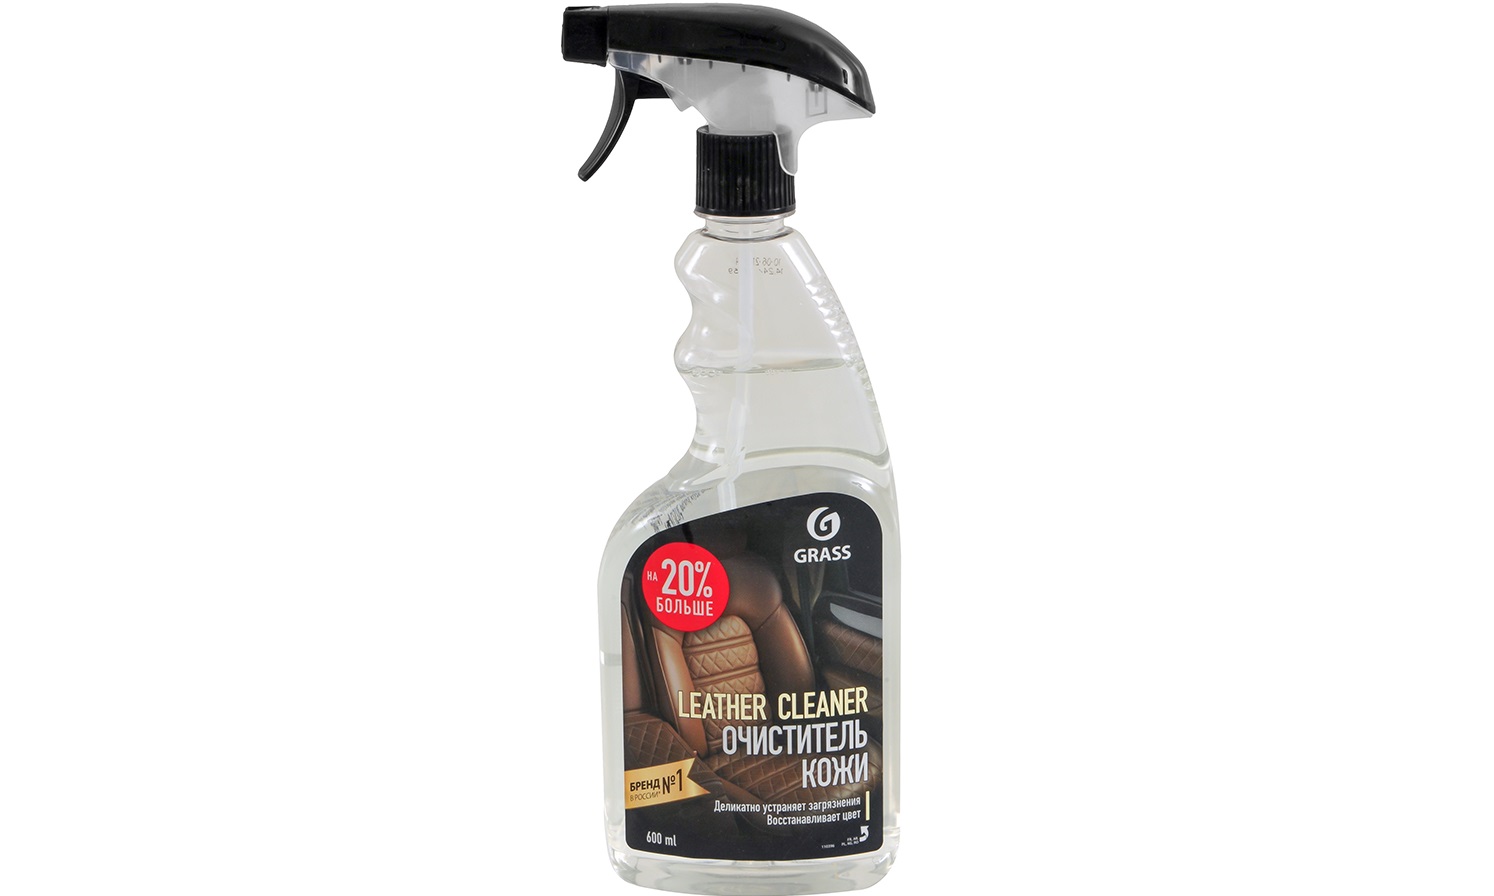 Brilliance leather cleaner